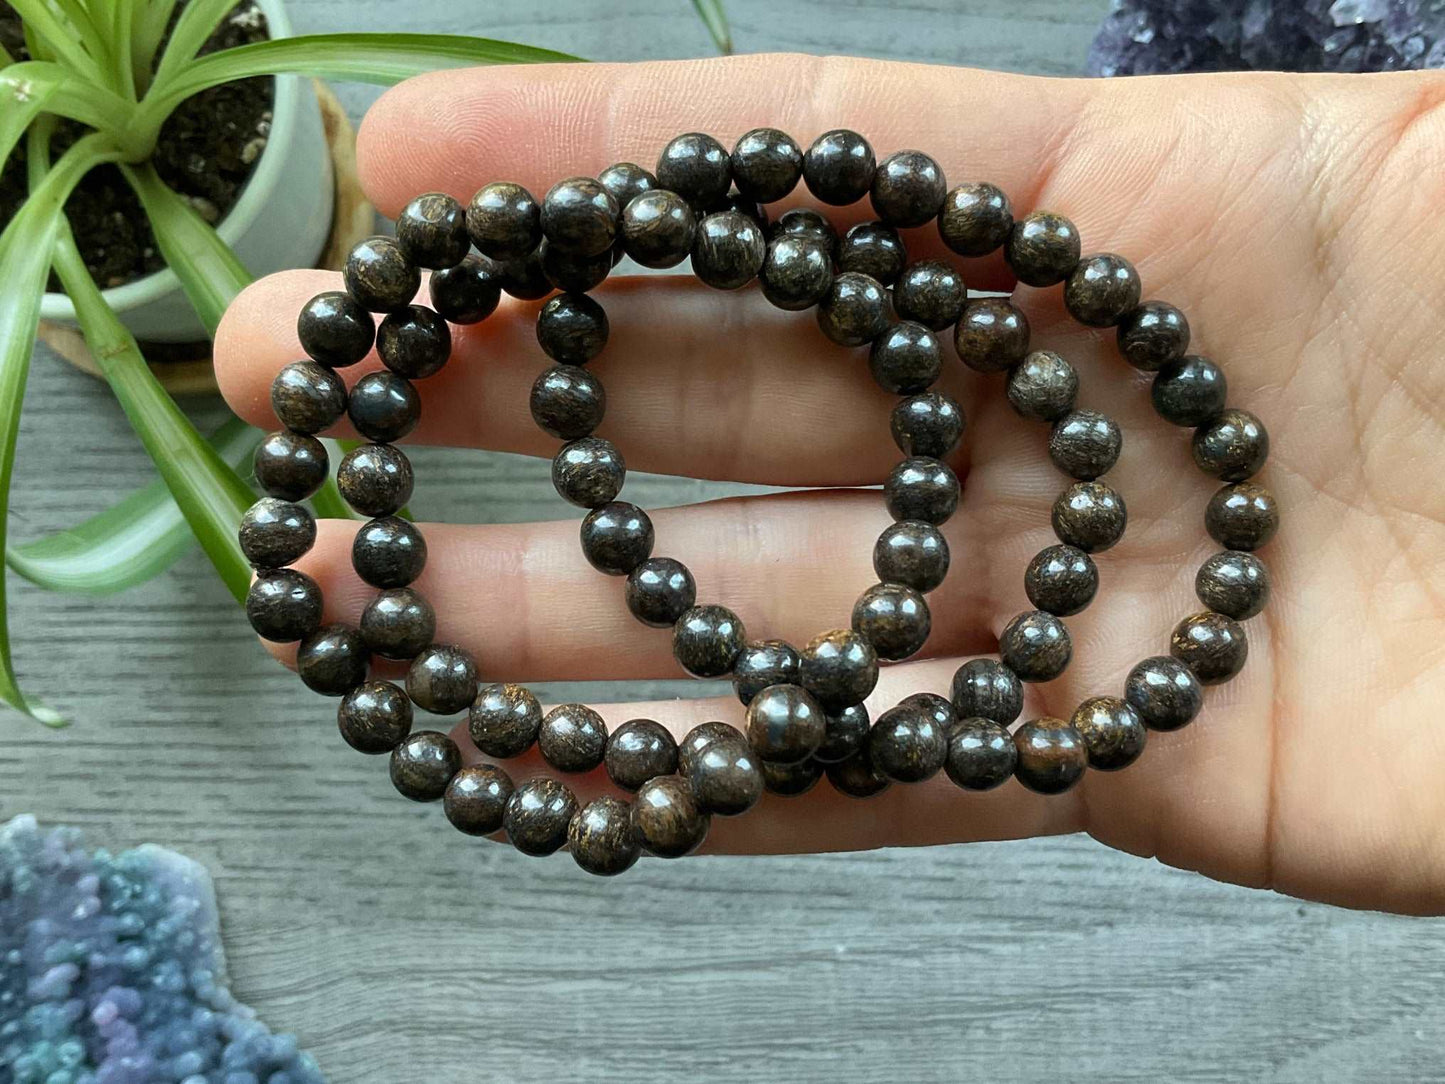 Pictured is a bronzite bead bracelet.